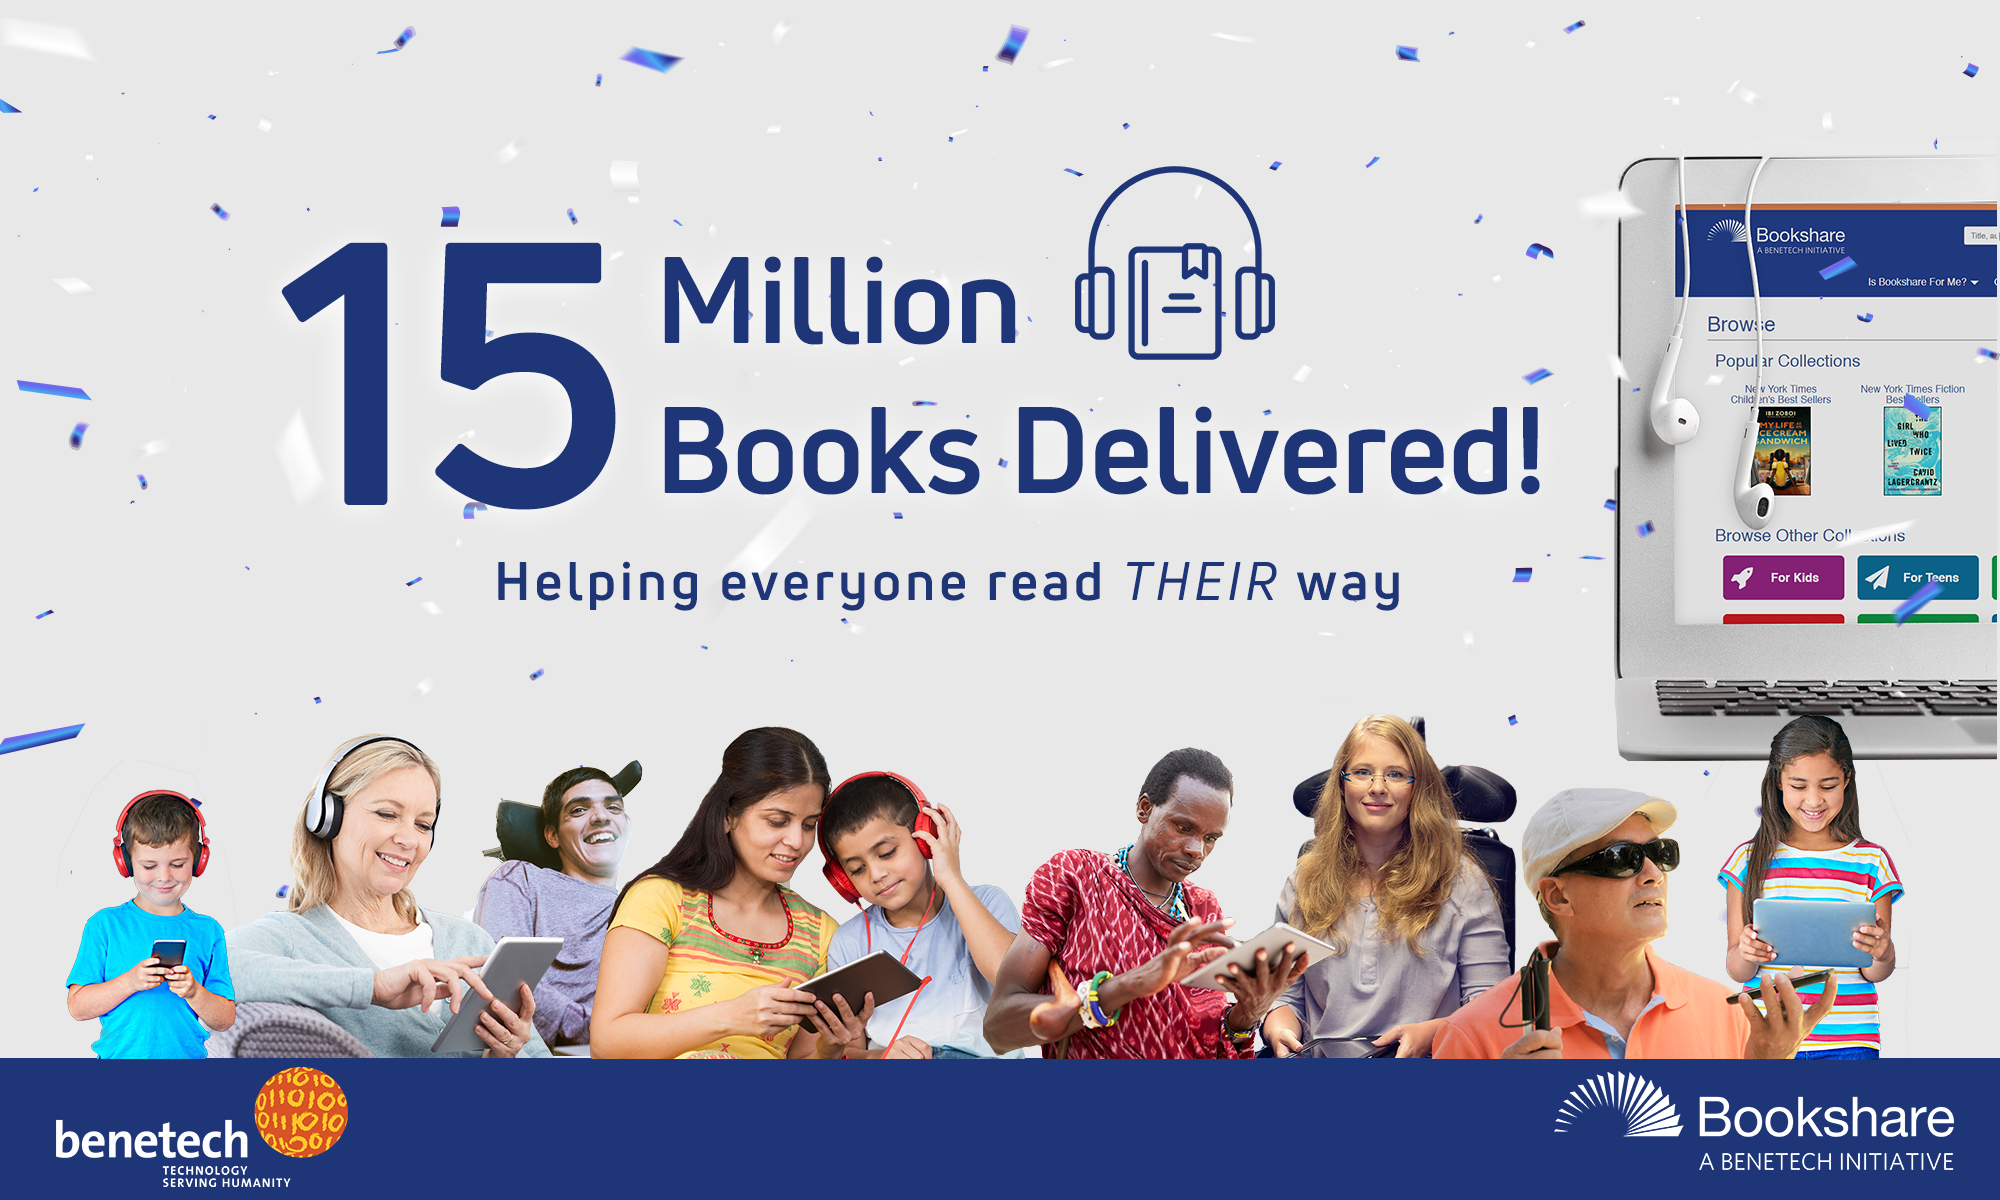 Audiobook icon and photos of people of different ages and backgrounds reading on various devices. Text: 15 Million books delivered! Helping everyone read their way.